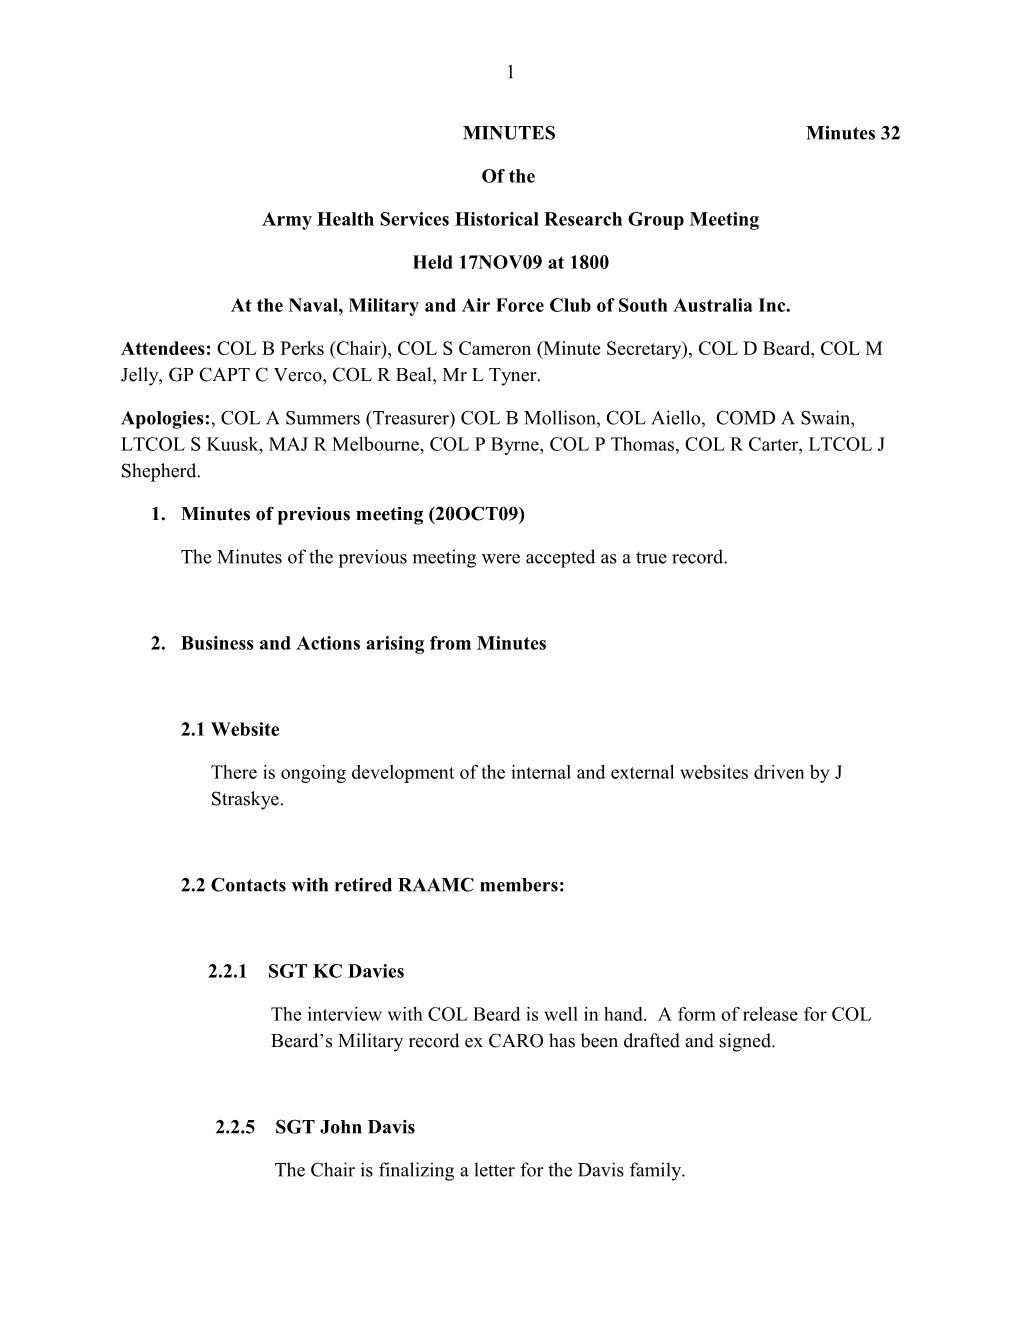 Army Health Services Historical Research Group Meeting